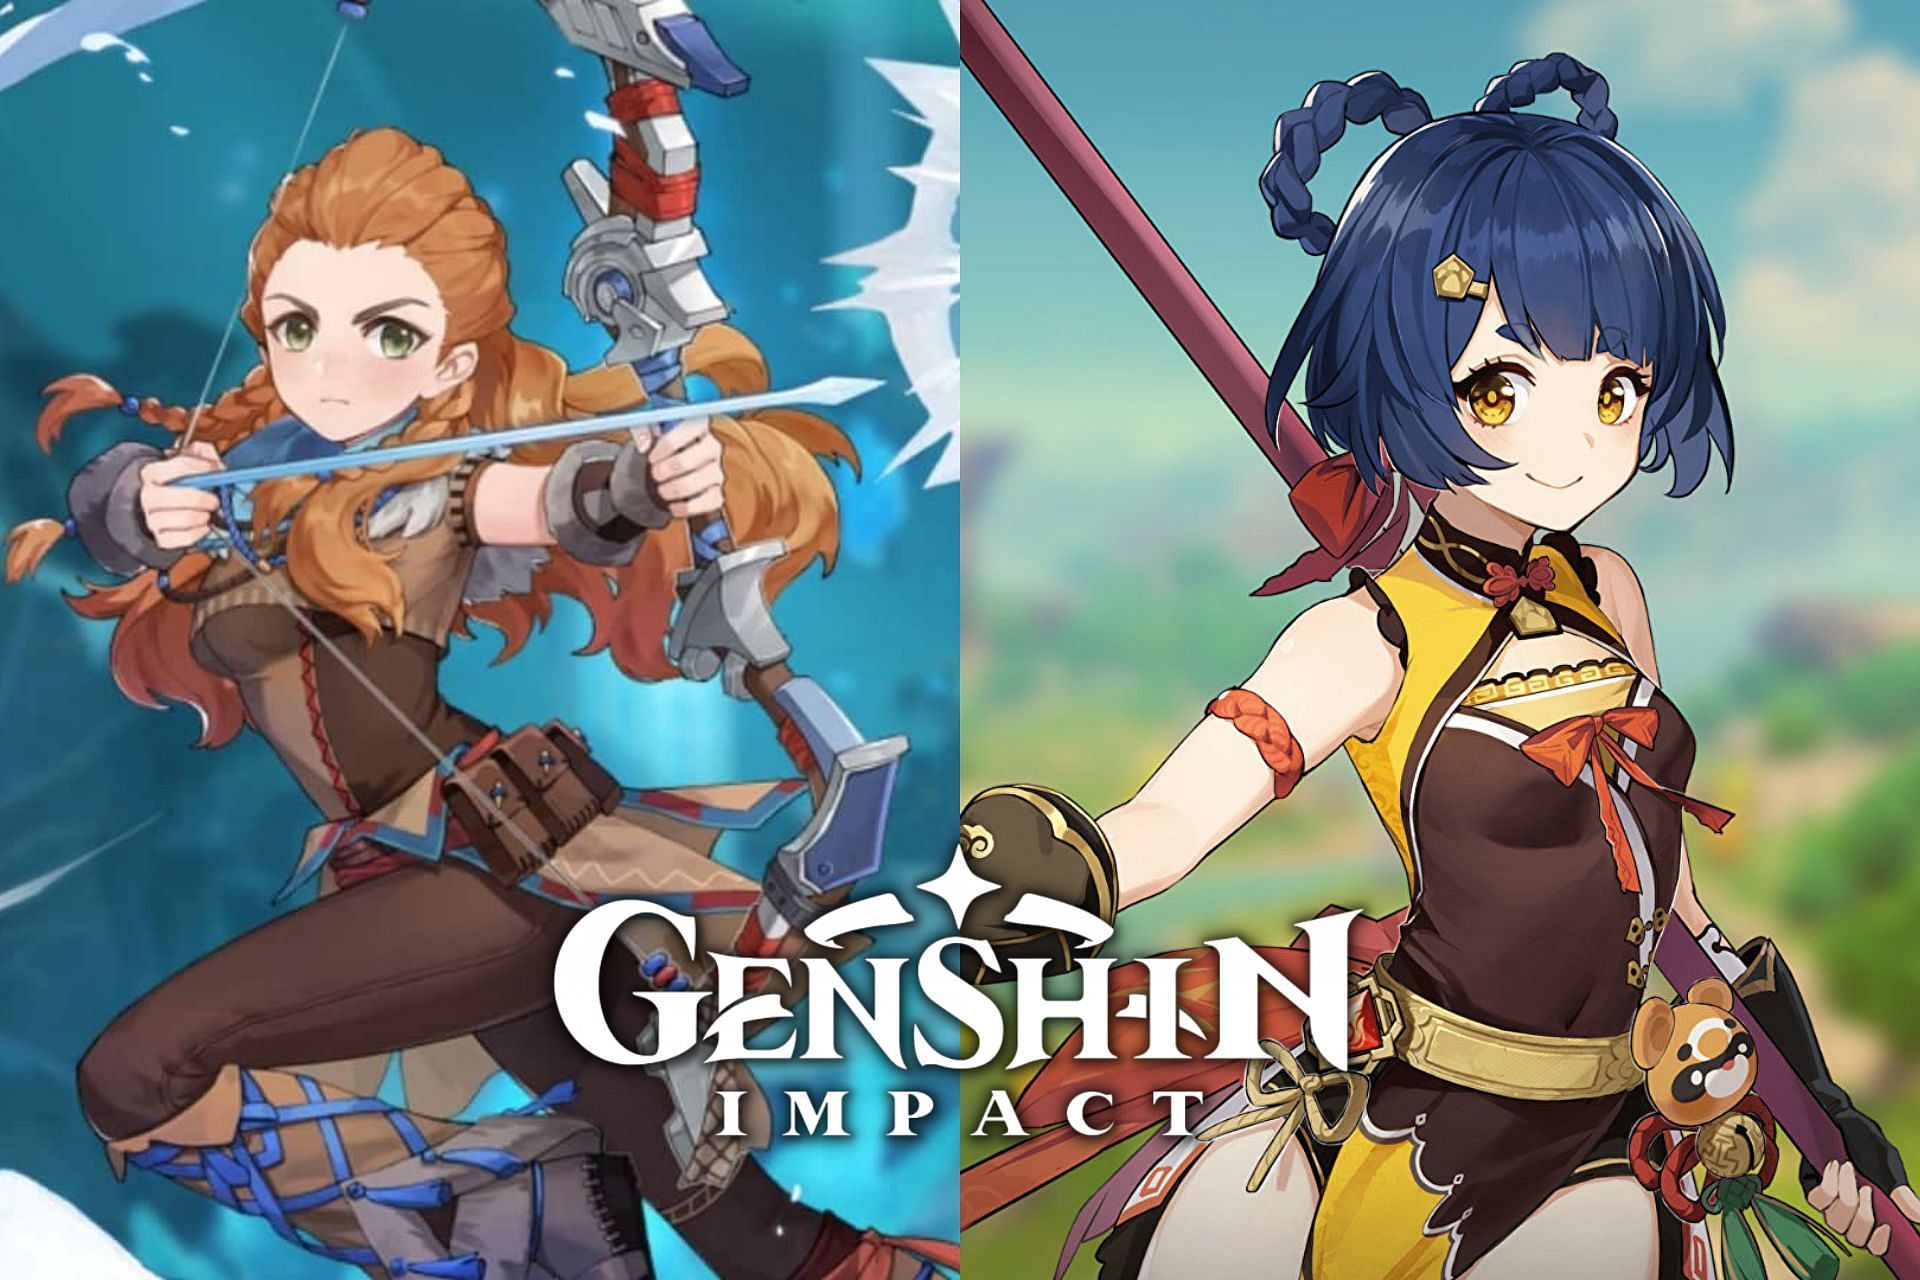 List of all free characters in Genshin Impact